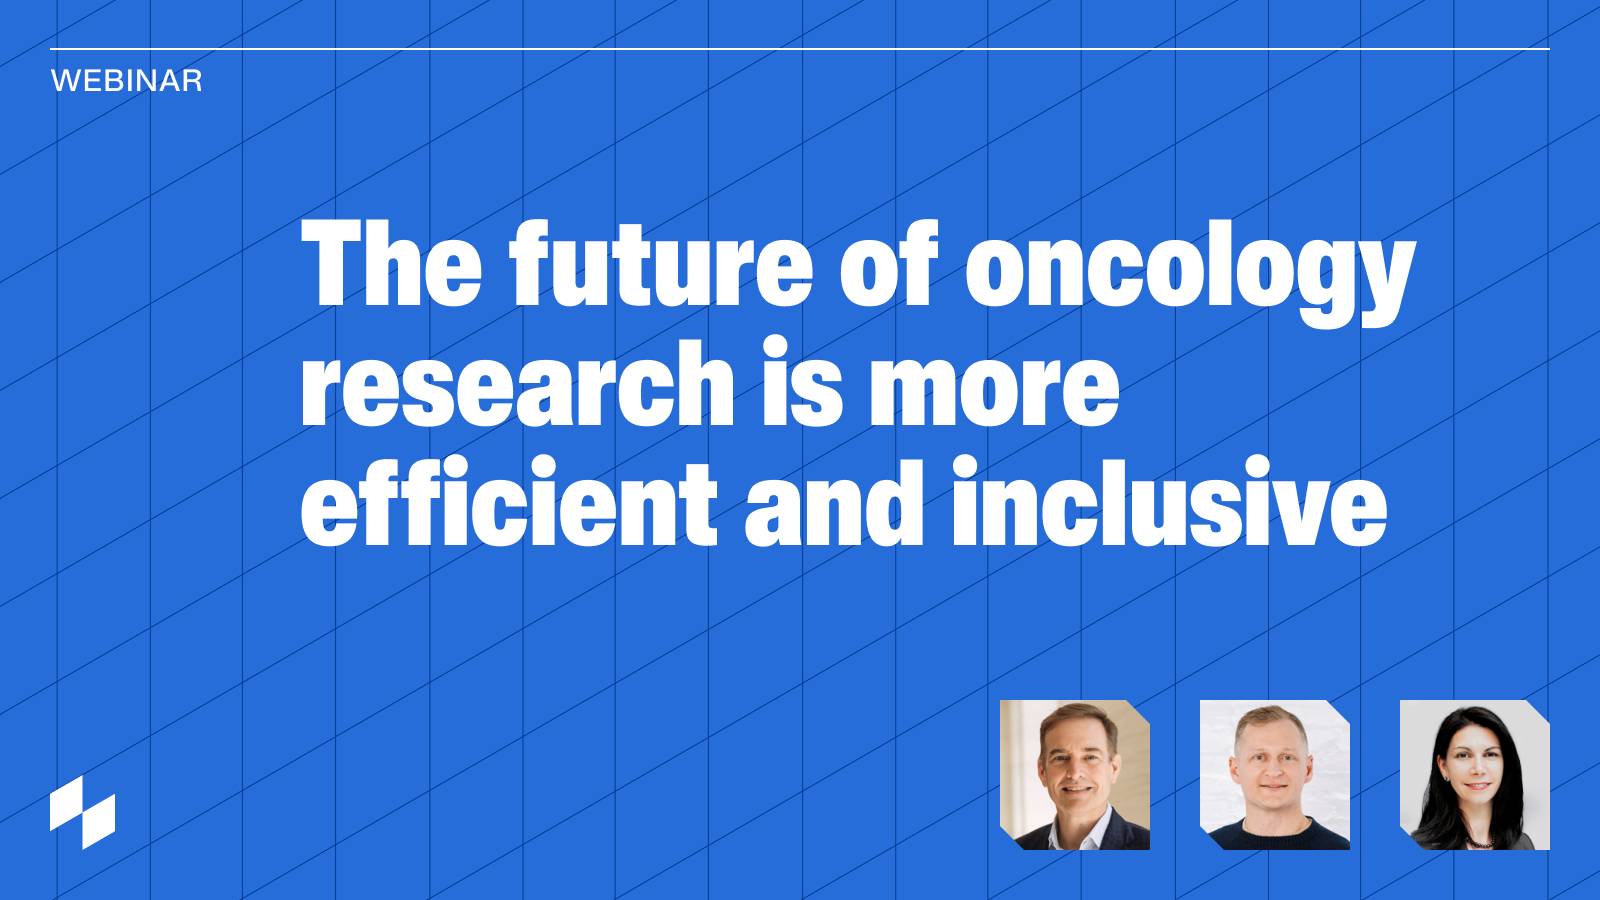 Challenging the status quo: The Future of oncology research is more efficient and inclusive